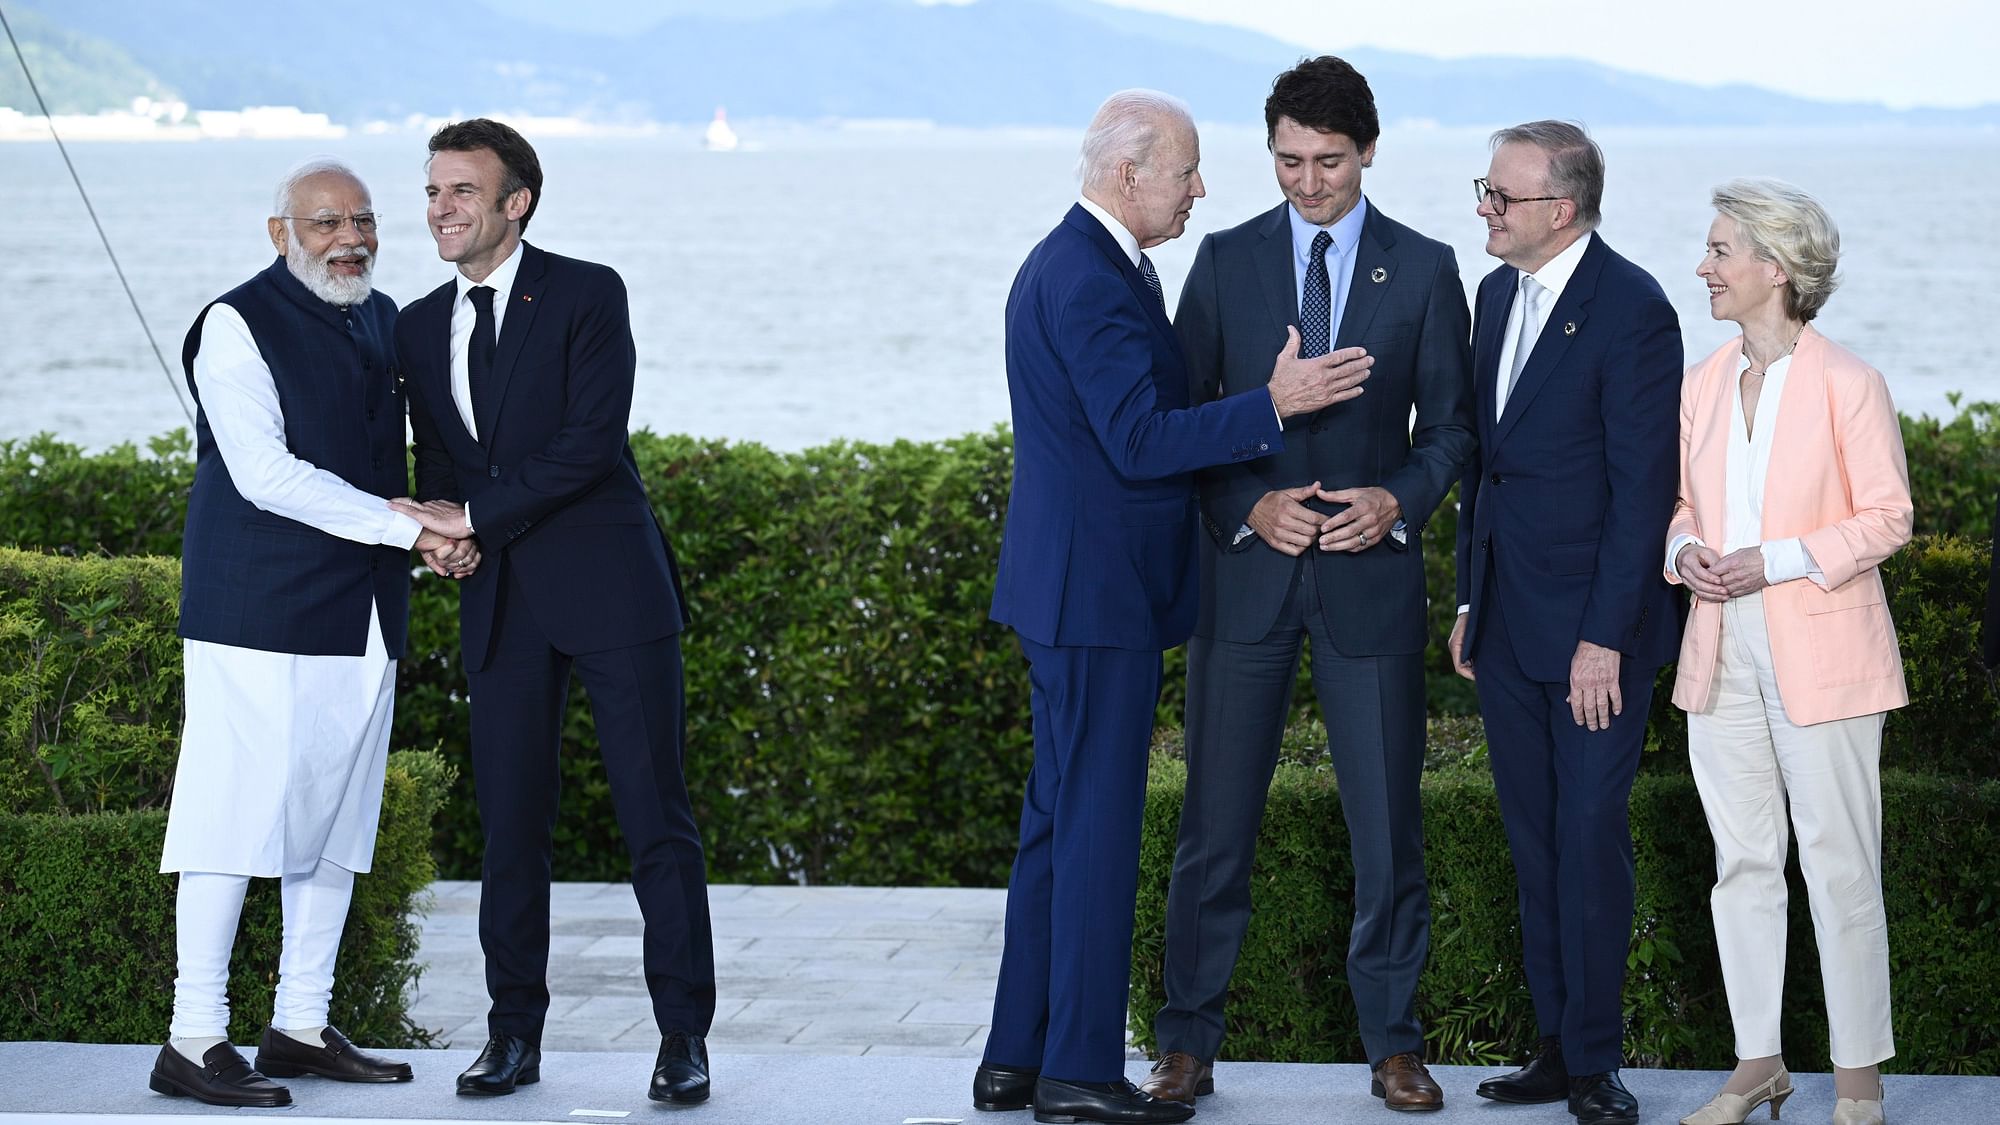 <div class="paragraphs"><p>Leaders will engage in summit-level discussions on the situation in Ukraine, nuclear disarmament and non-proliferation, regional affairs, and the global economy as well as the global issues of climate change an health at the G7 Summit 2023.</p></div>